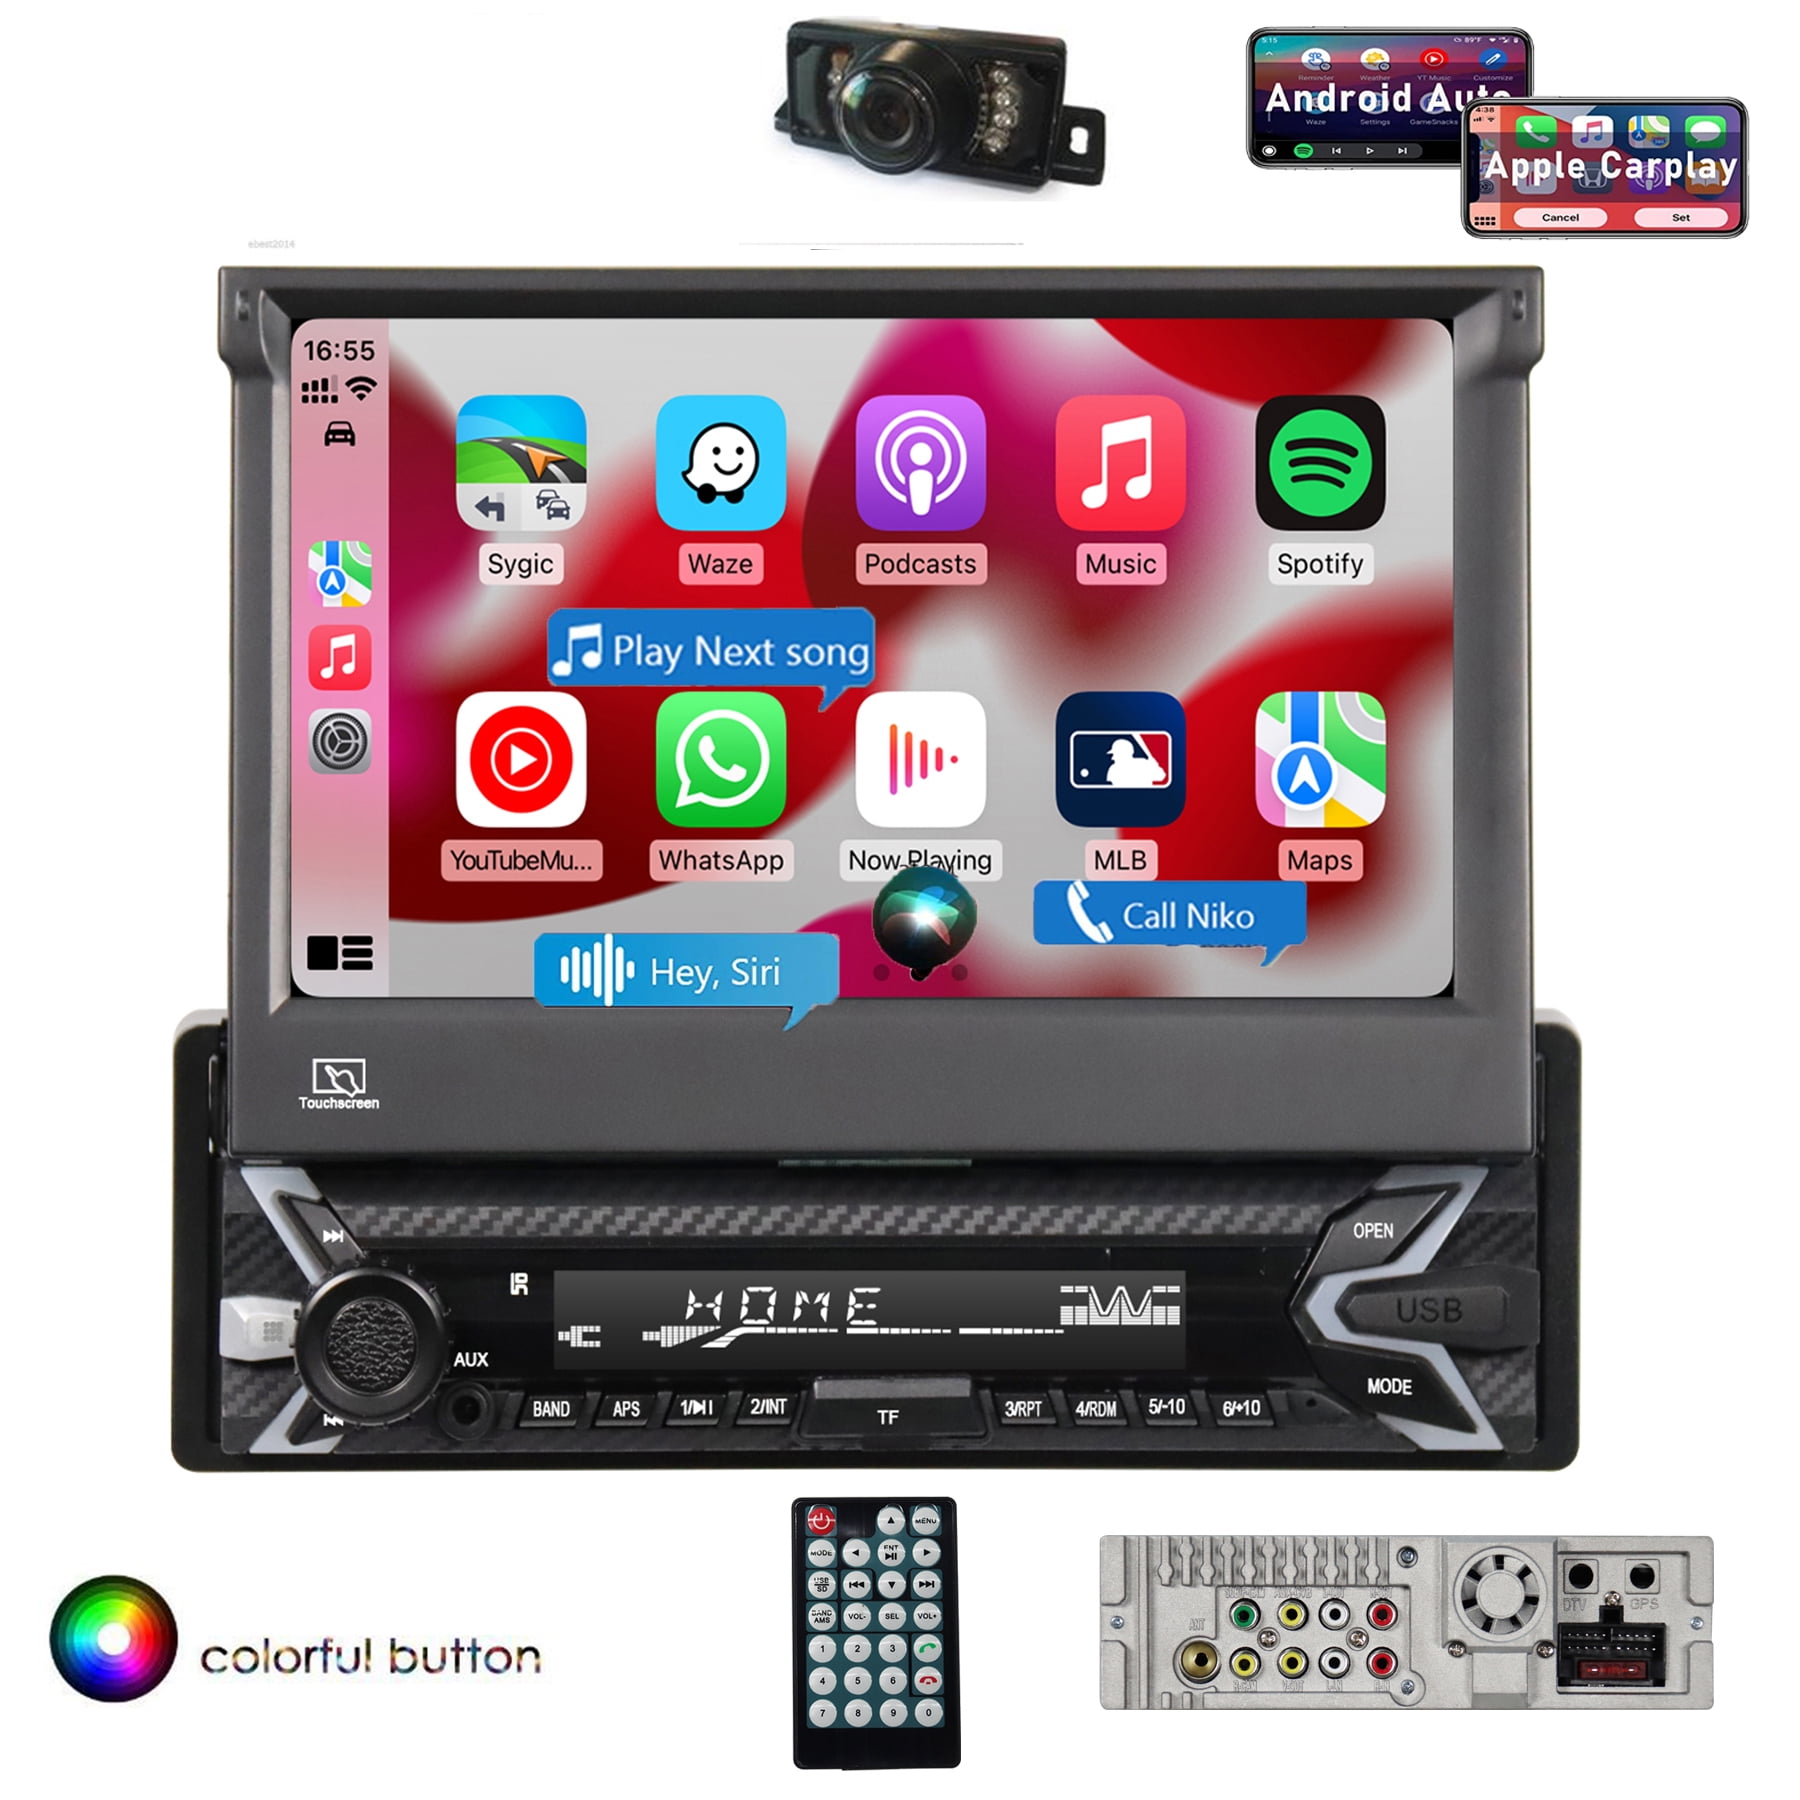 Single DIN In Dash Car Stereo with Apple Carplay Android Auto Head Unit  inch Flip Out Capacitive Touch Screen Audio Video ,Radio,Bluetooth, Built-in  Microphone,USB SD Backup Camera